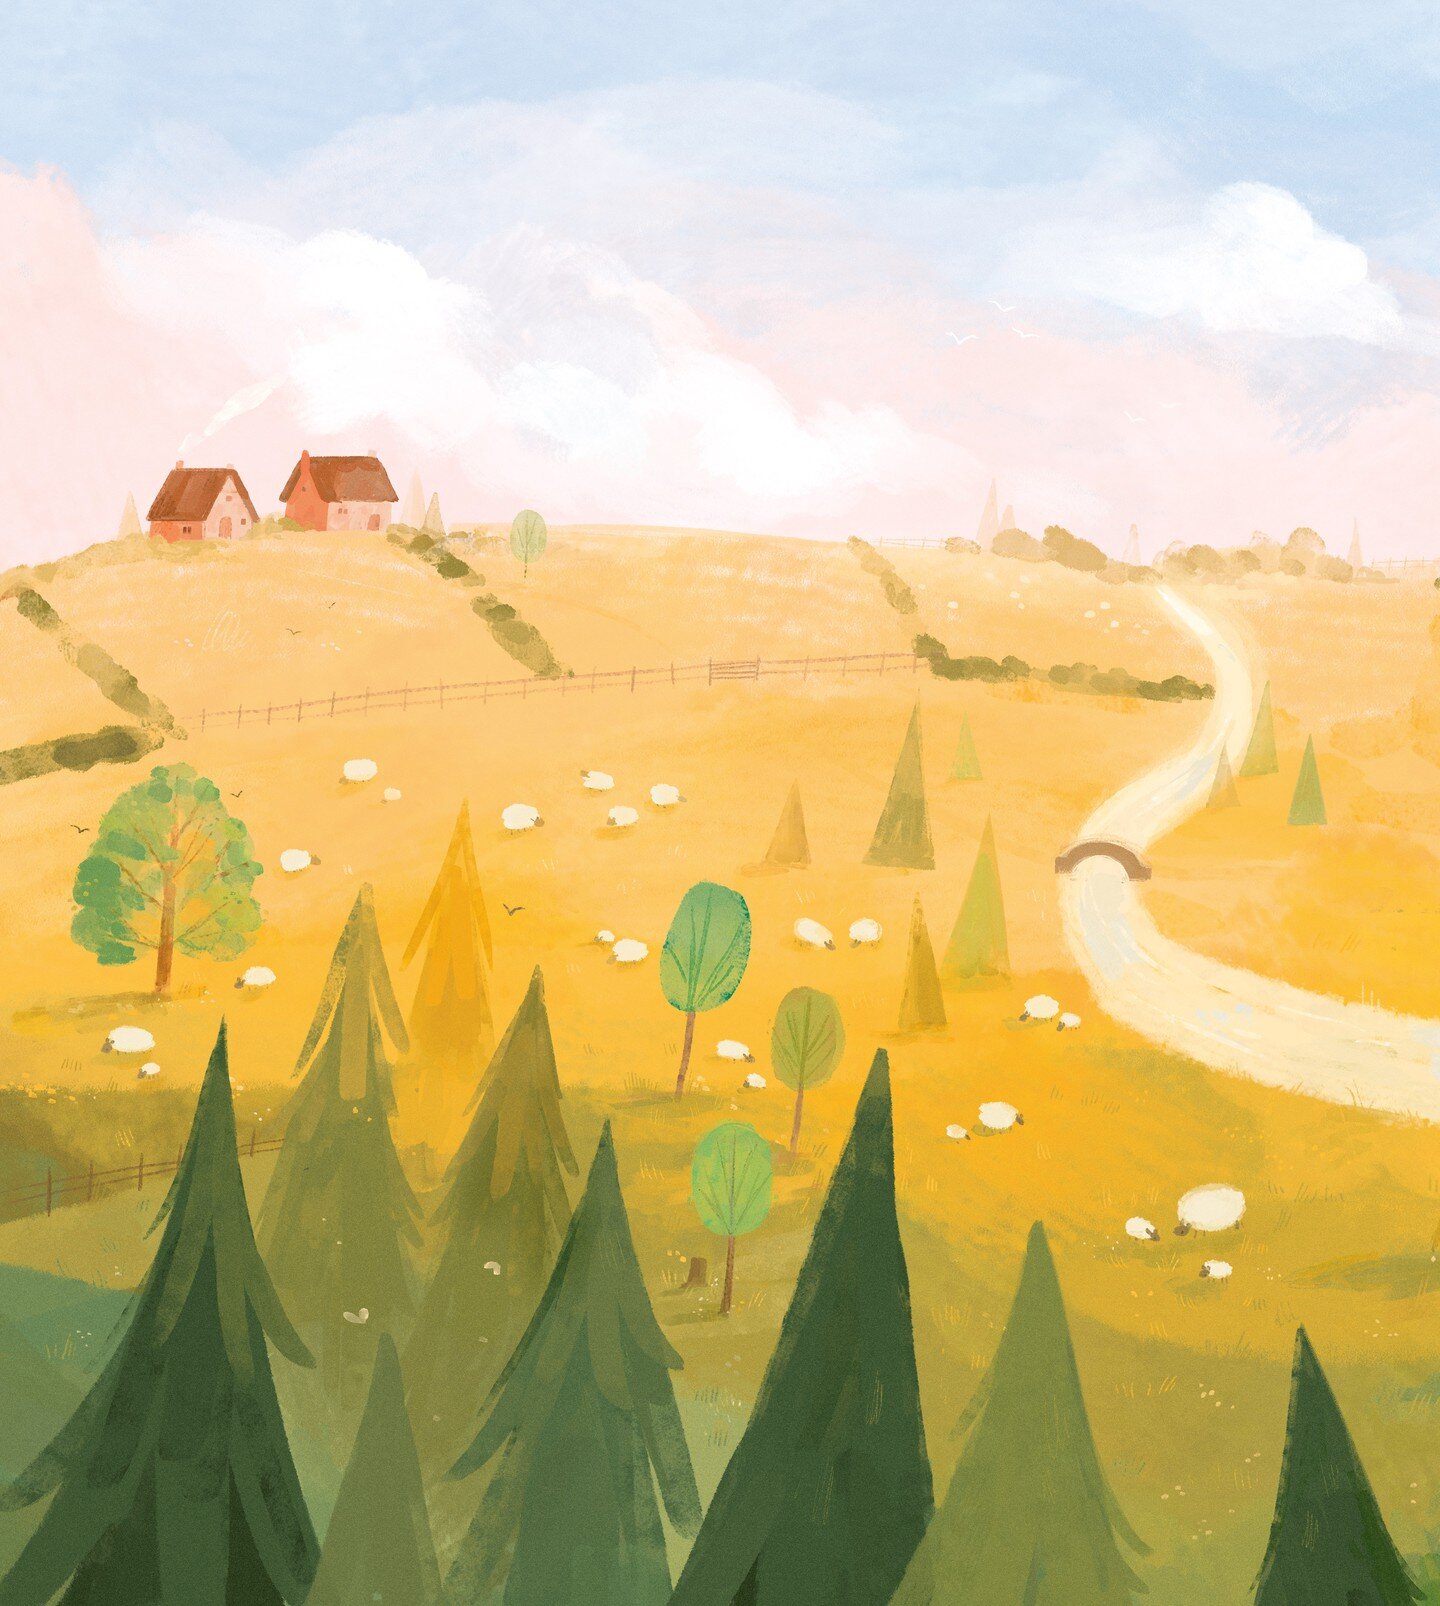 A spread from my upcoming picture book, I'm Not Sleepy. As Flora's grand adventure takes her through the seasons, I had a chance to explore and experiment with a variety of environments. You'll be able to see all of them soon! Where do you think Flor